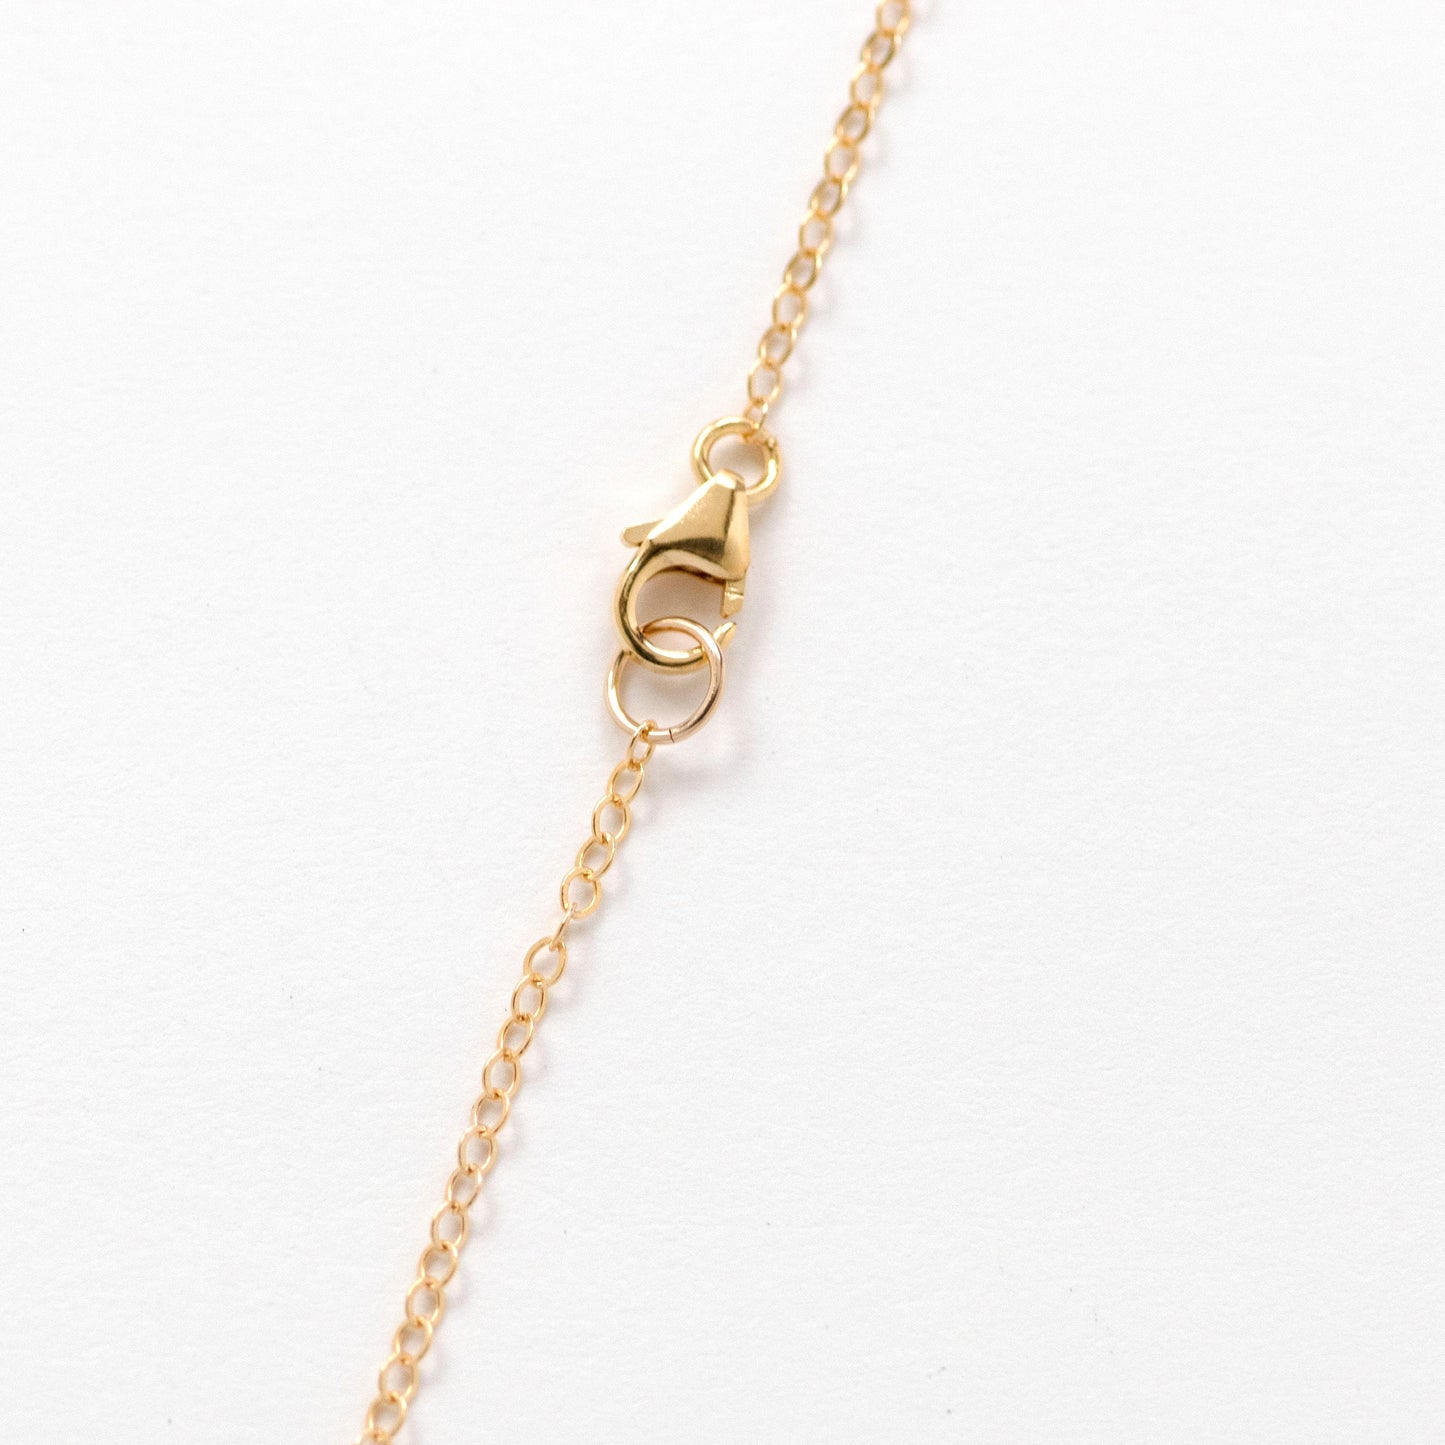 14k gold filled chain with lobster clasp